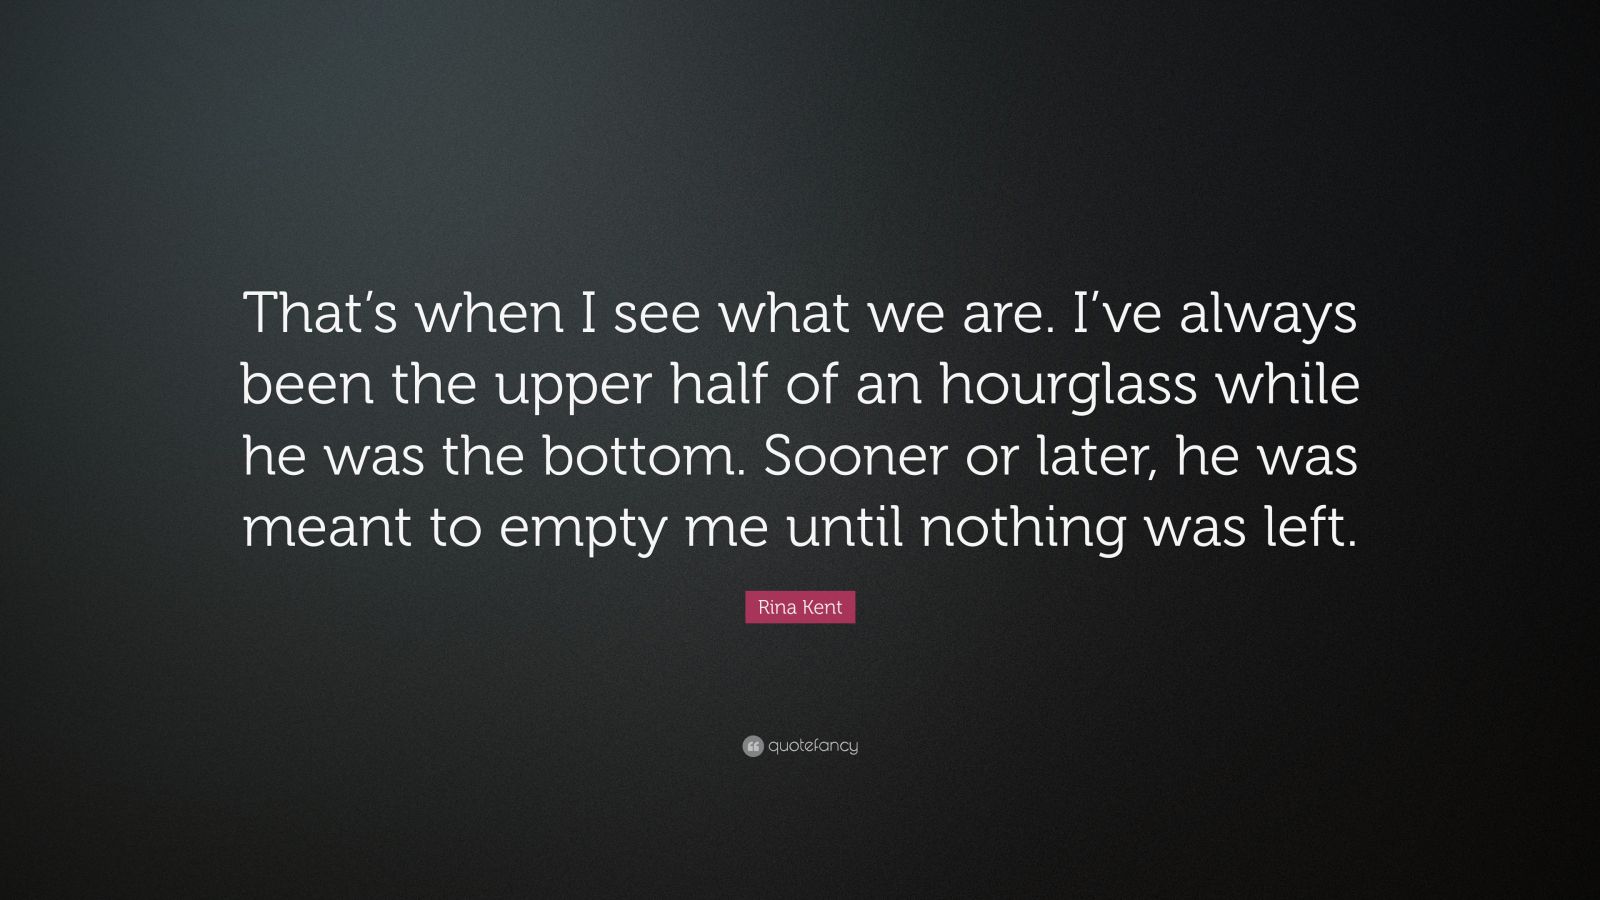 Rina Kent Quote: “That’s when I see what we are. I’ve always been the ...